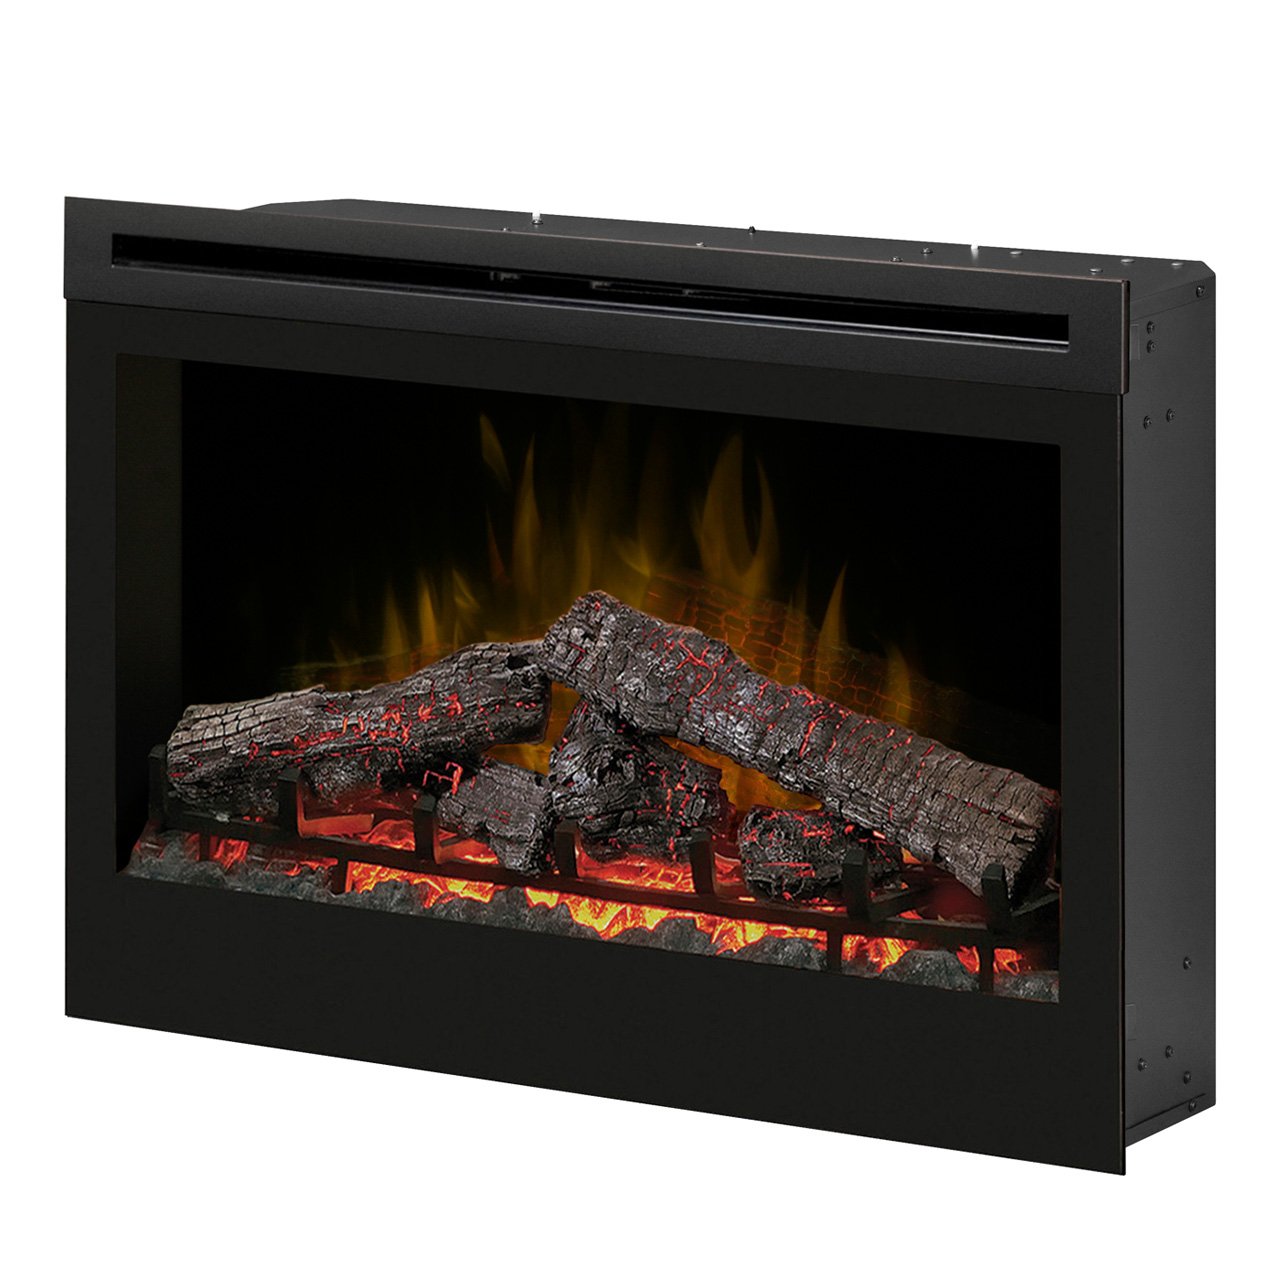 Fireplace Brick Replacement Lovely Dimplex Df3033st 33 Inch Self Trimming Electric Fireplace Insert